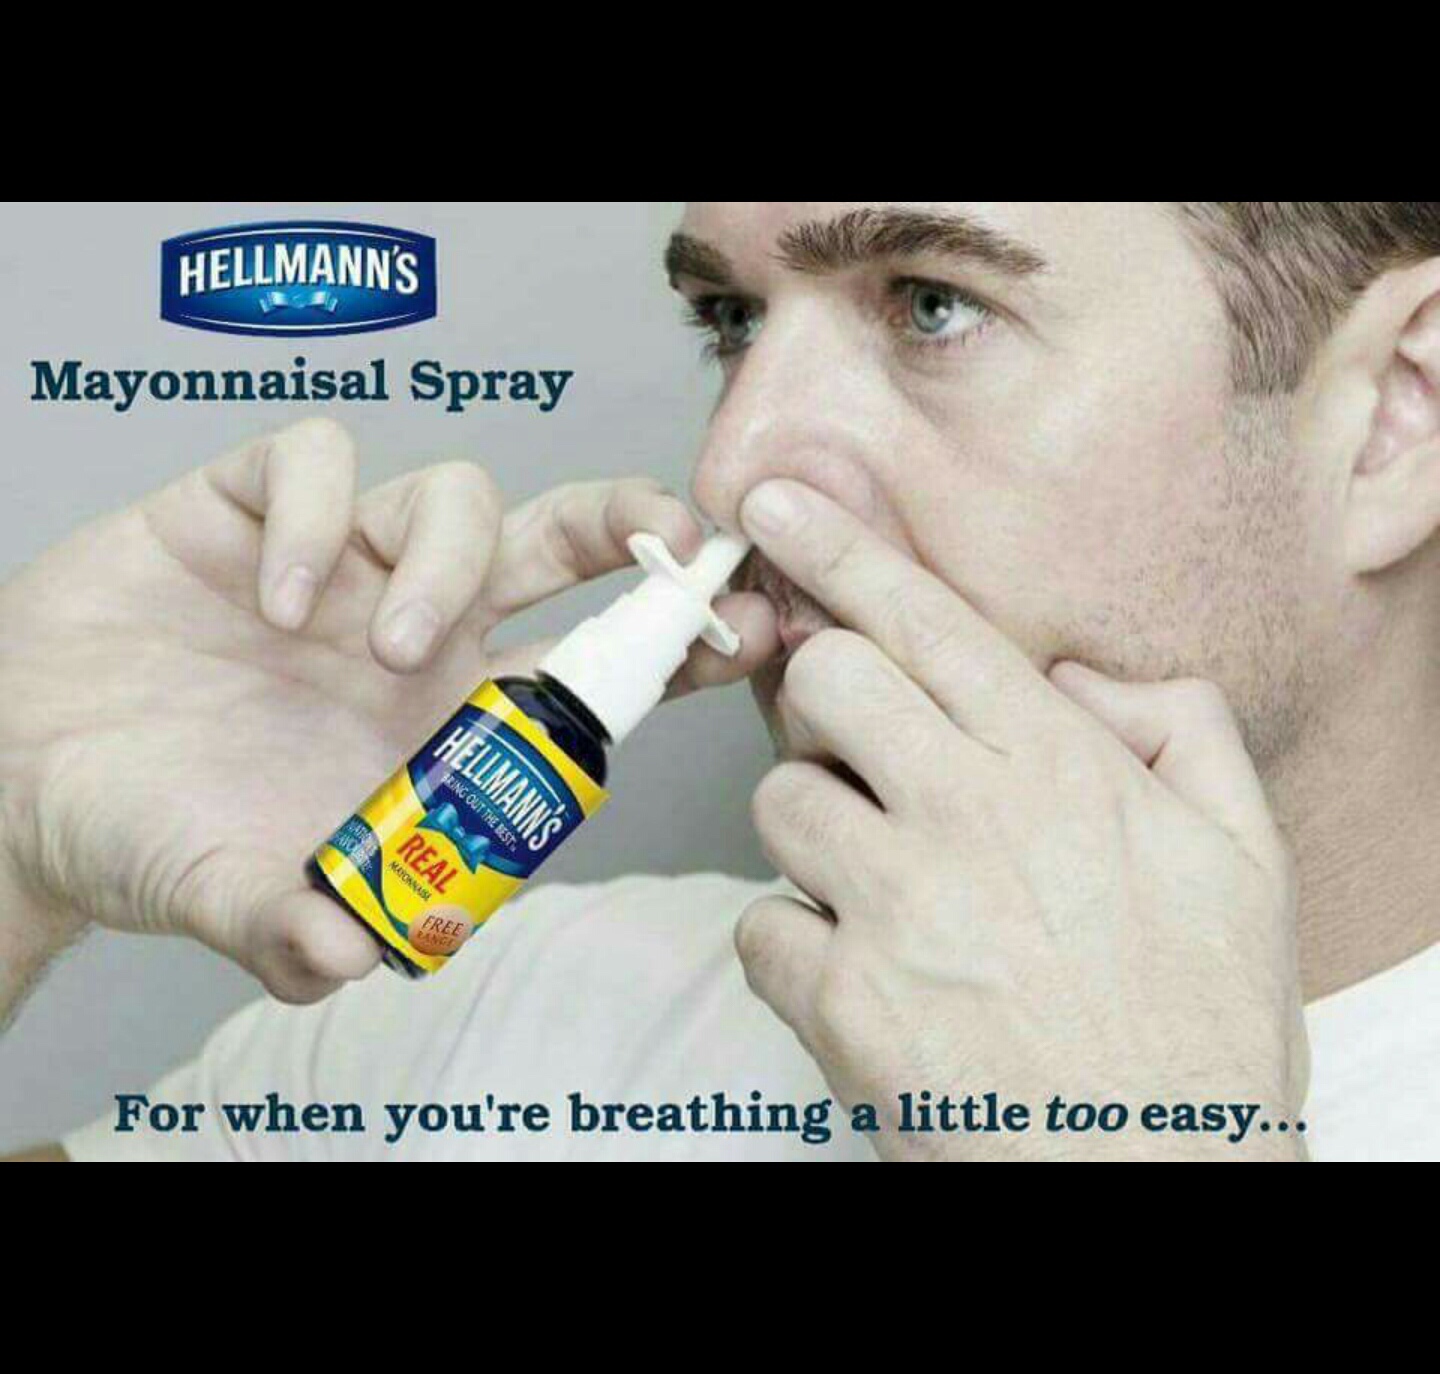 mayo nasal spray - Hellmann'S Mayonnaisal Spray Bring Out The Best Hellmanns Real Mayoanas For when you're breathing a little too easy...